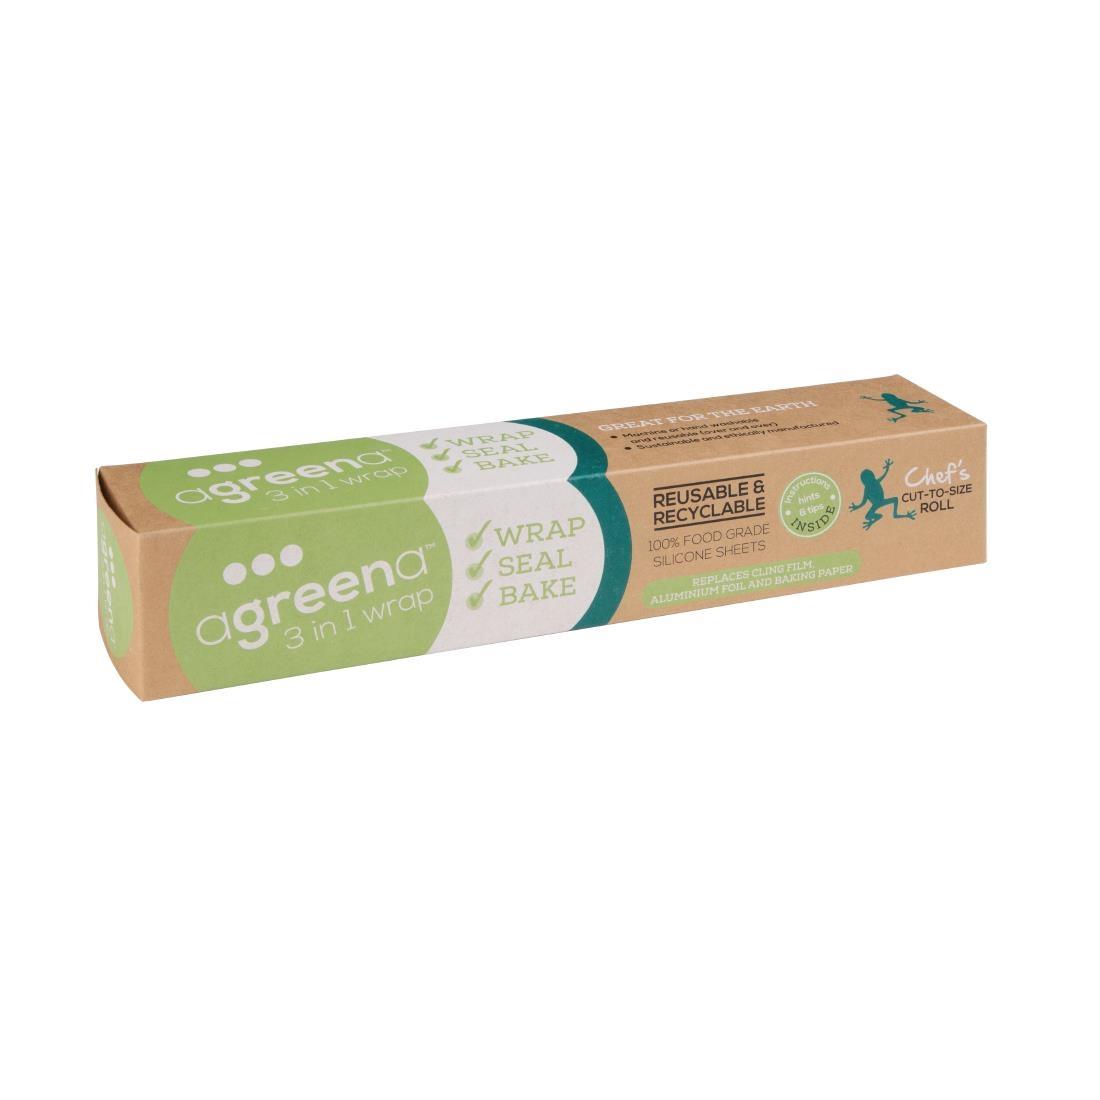 Agreena Three-In-One Reusable Food Wrap 1500 x 300mm - FD933  - 1